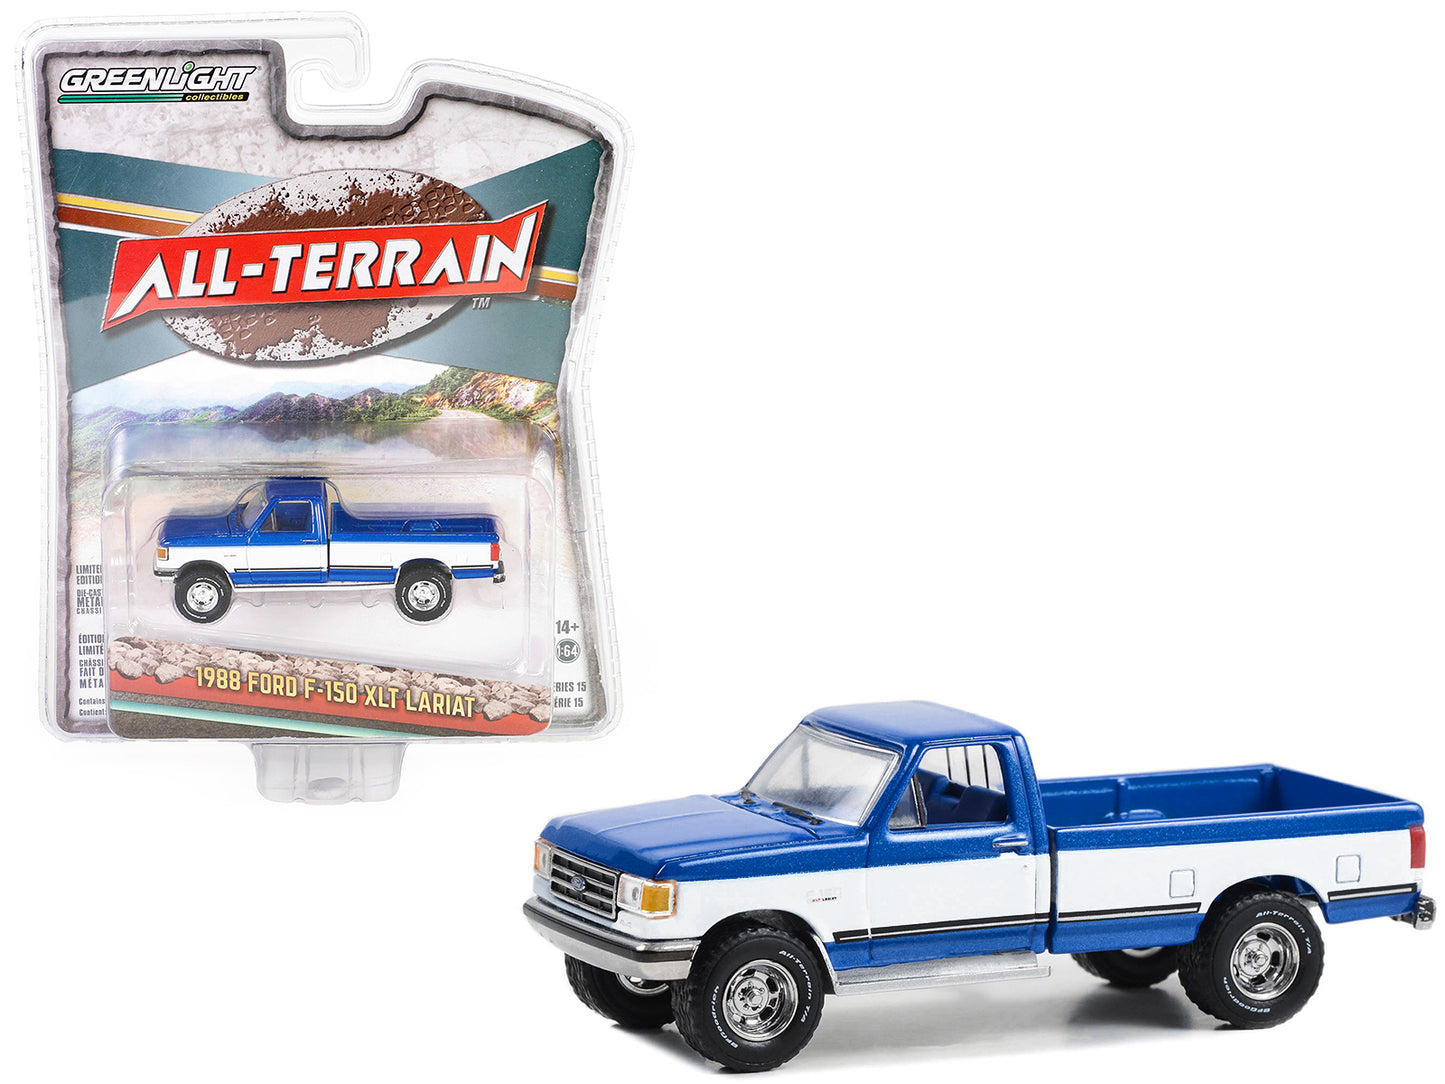 1988 Ford F-150 XLT Lariat Pickup Truck Blue Metallic and White with Blue Interior "All Terrain" Series 15 1/64 Diecast Model Car by Greenlight